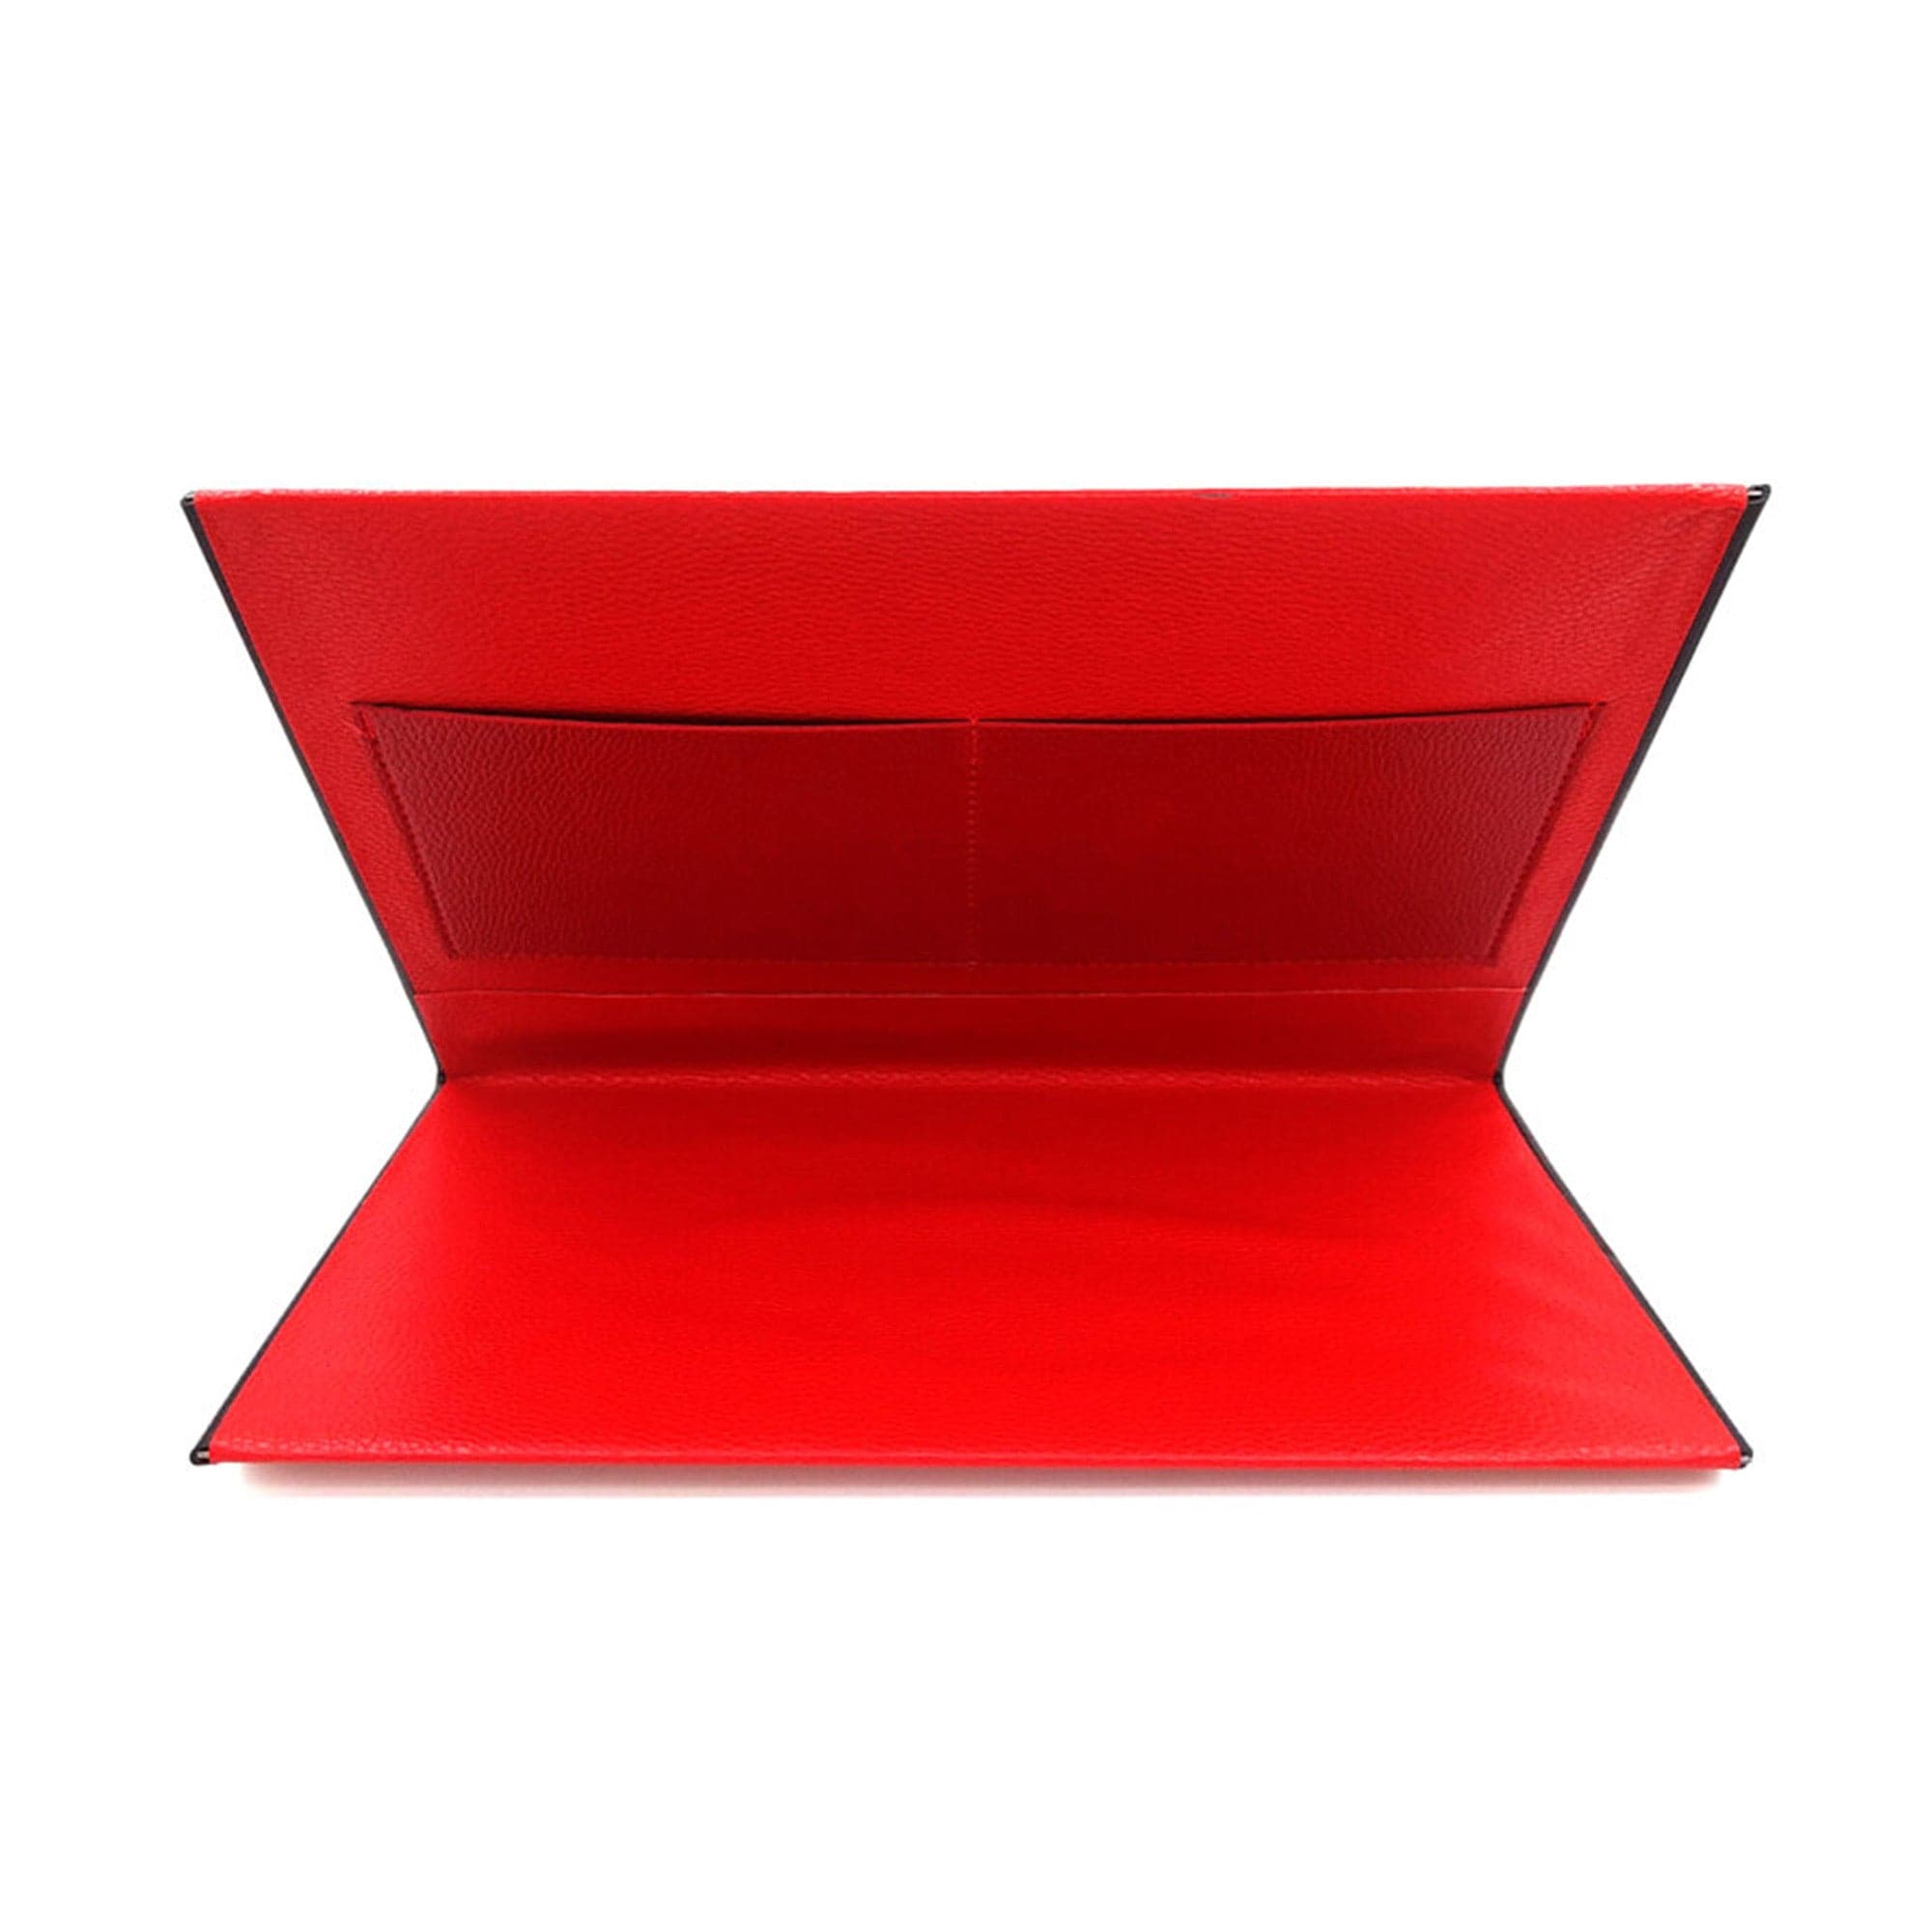 Eson - Magnetic Scissor Display Stand Holder (Red)